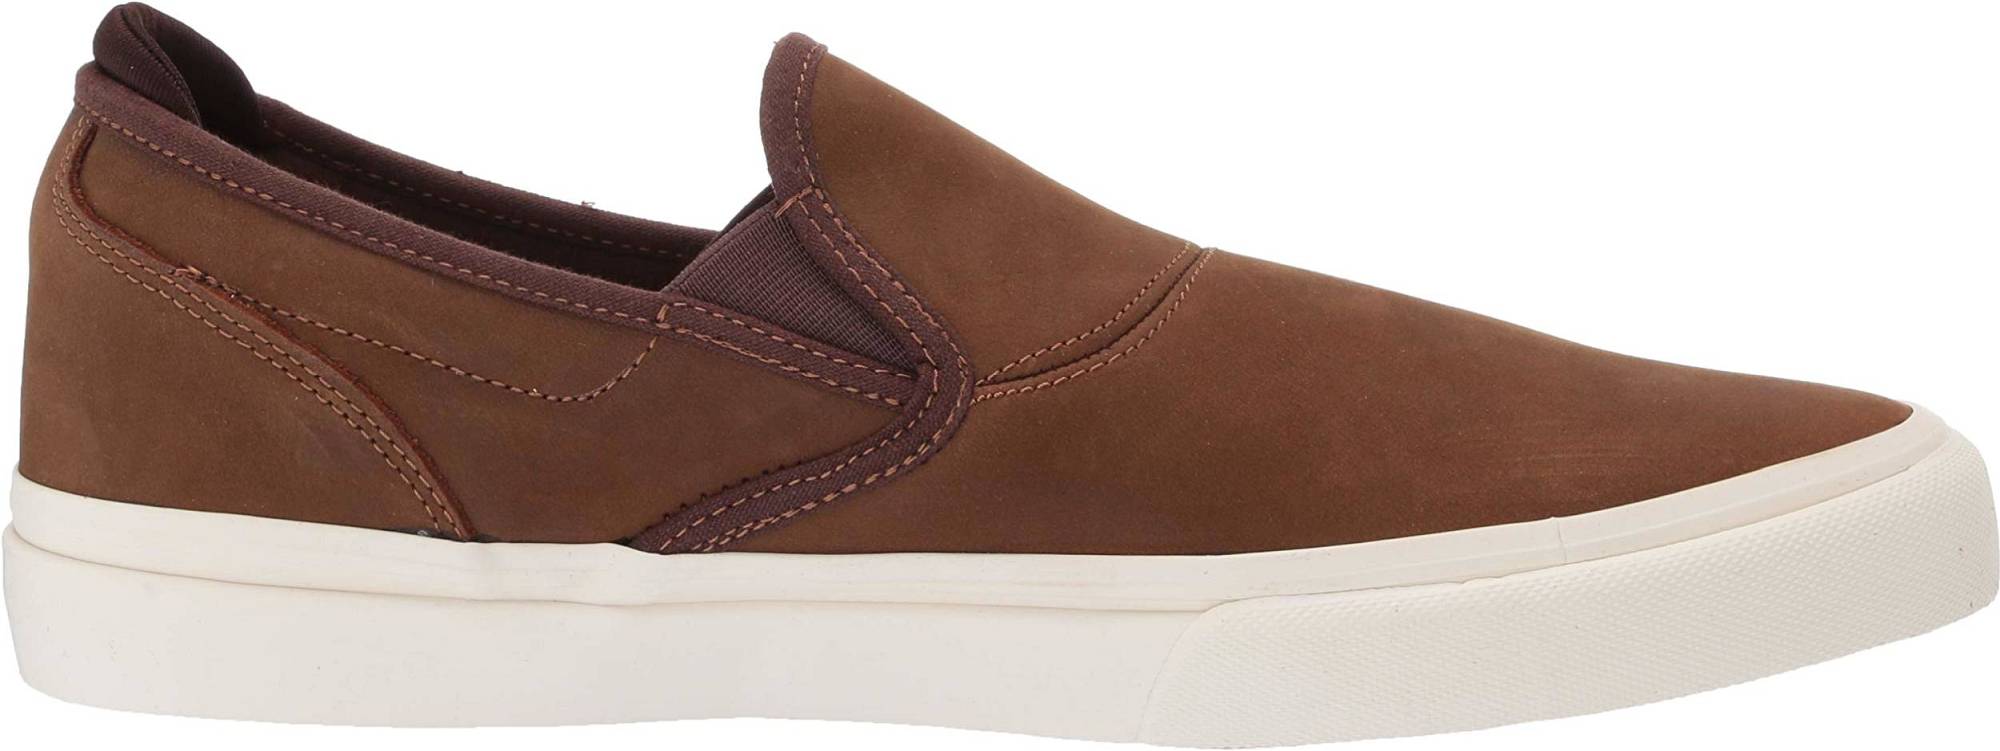 Emerica Wino G6 Slip-On – Shoes Reviews & Reasons To Buy